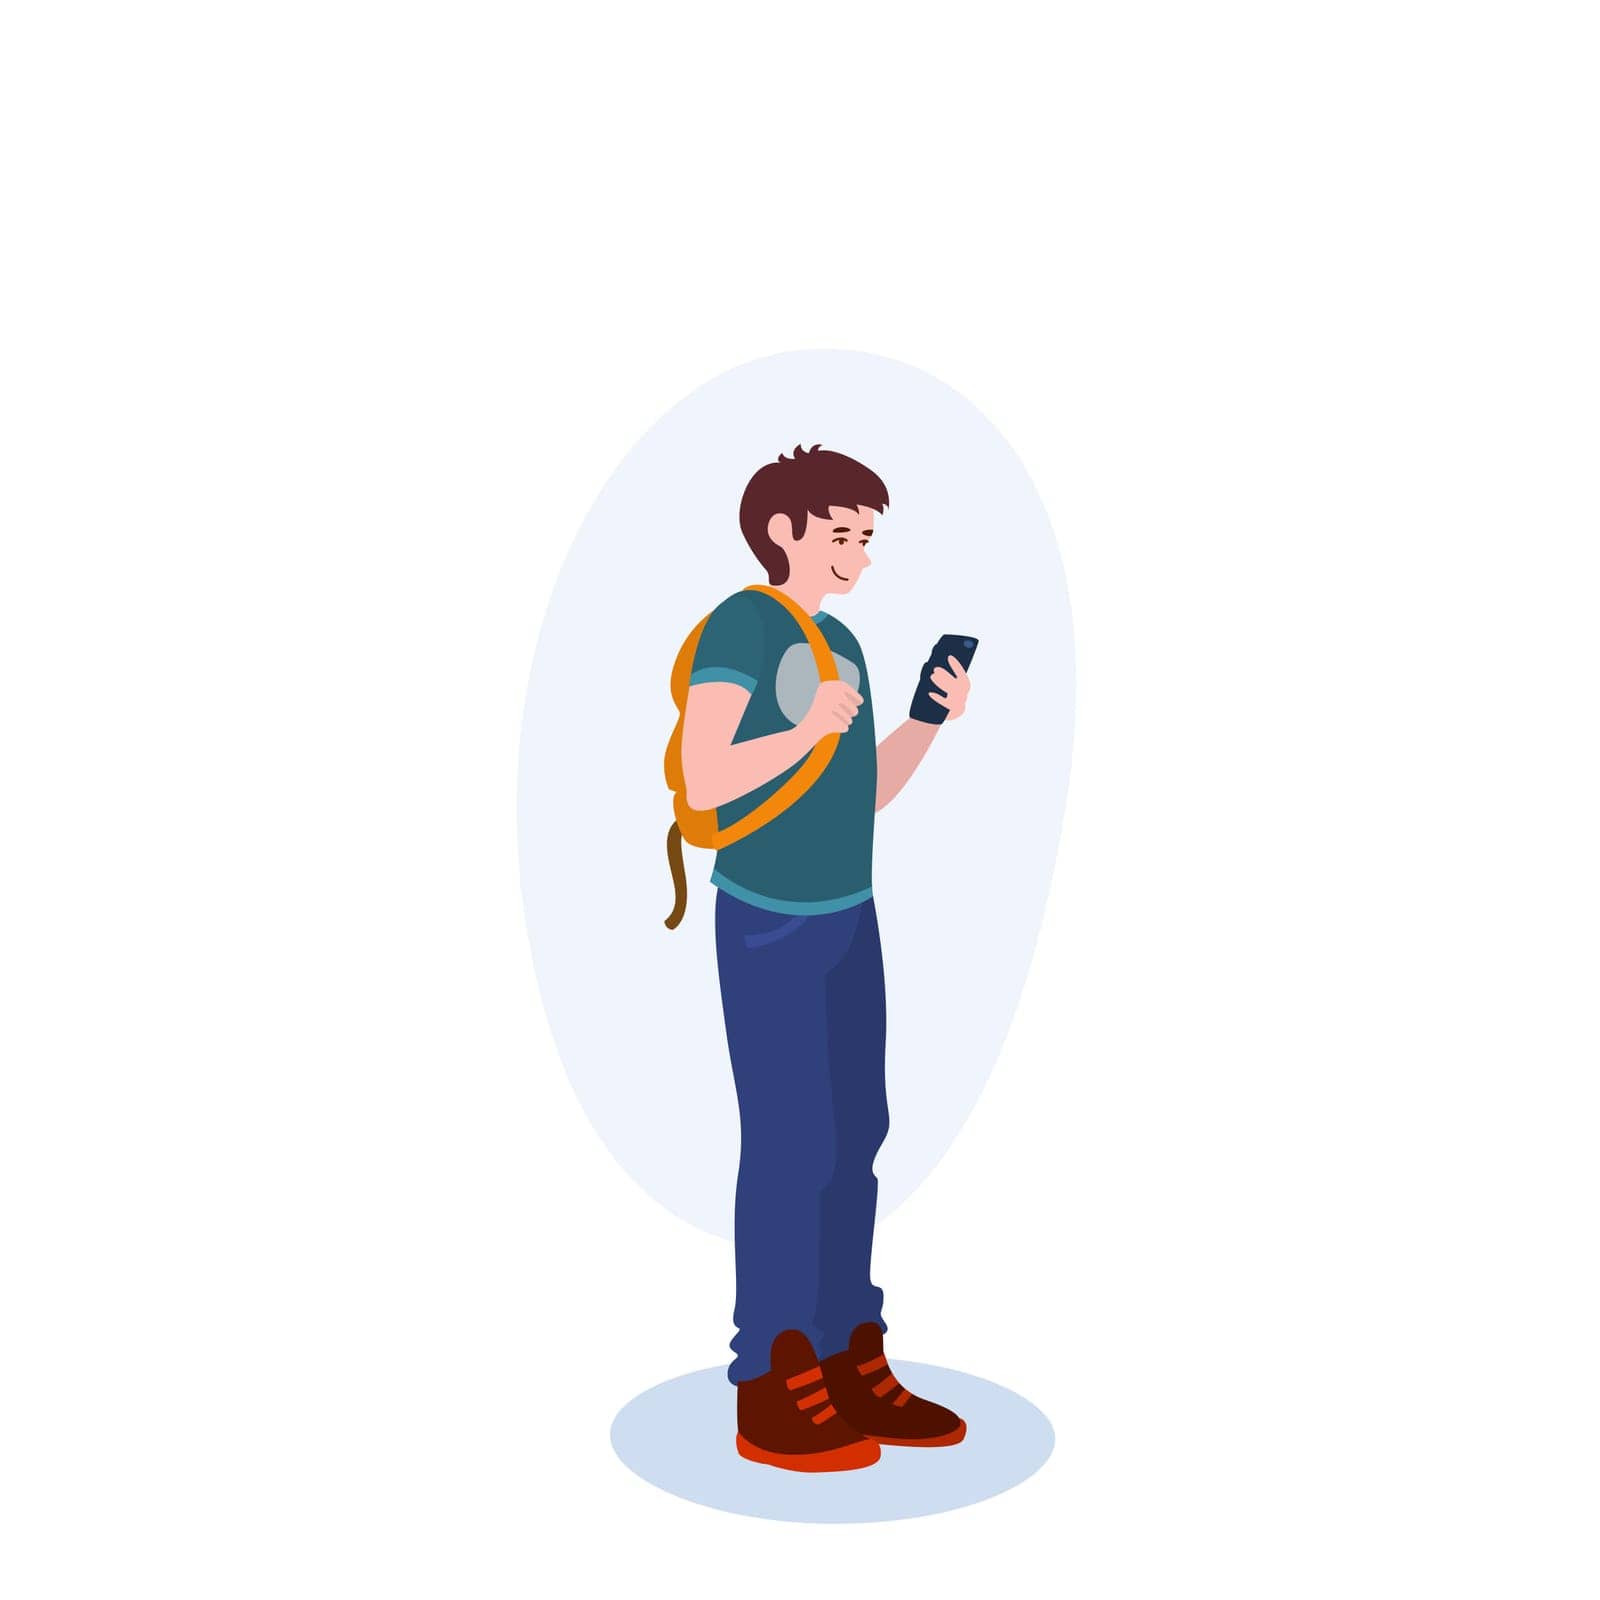 Teen Boy With Phone illustration. Boy, smartphone, t-shirt, backpack. Creative editable vector graphic design.